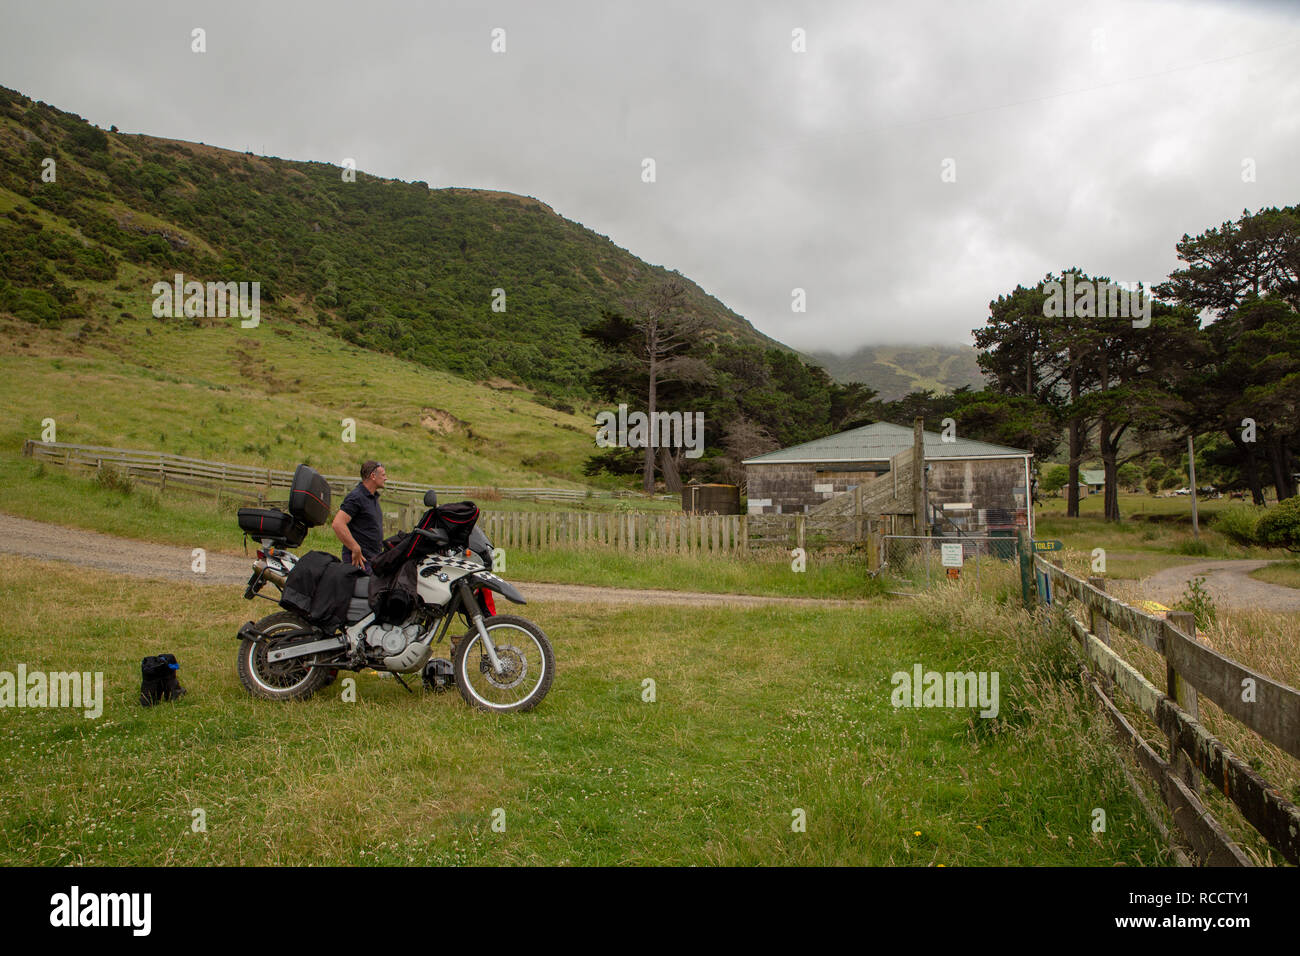 Flea Bay, Canterbury, New Zealand - January 6 2019: a man on a motorbike takes a break at the end of the windy road down into the bay Stock Photo